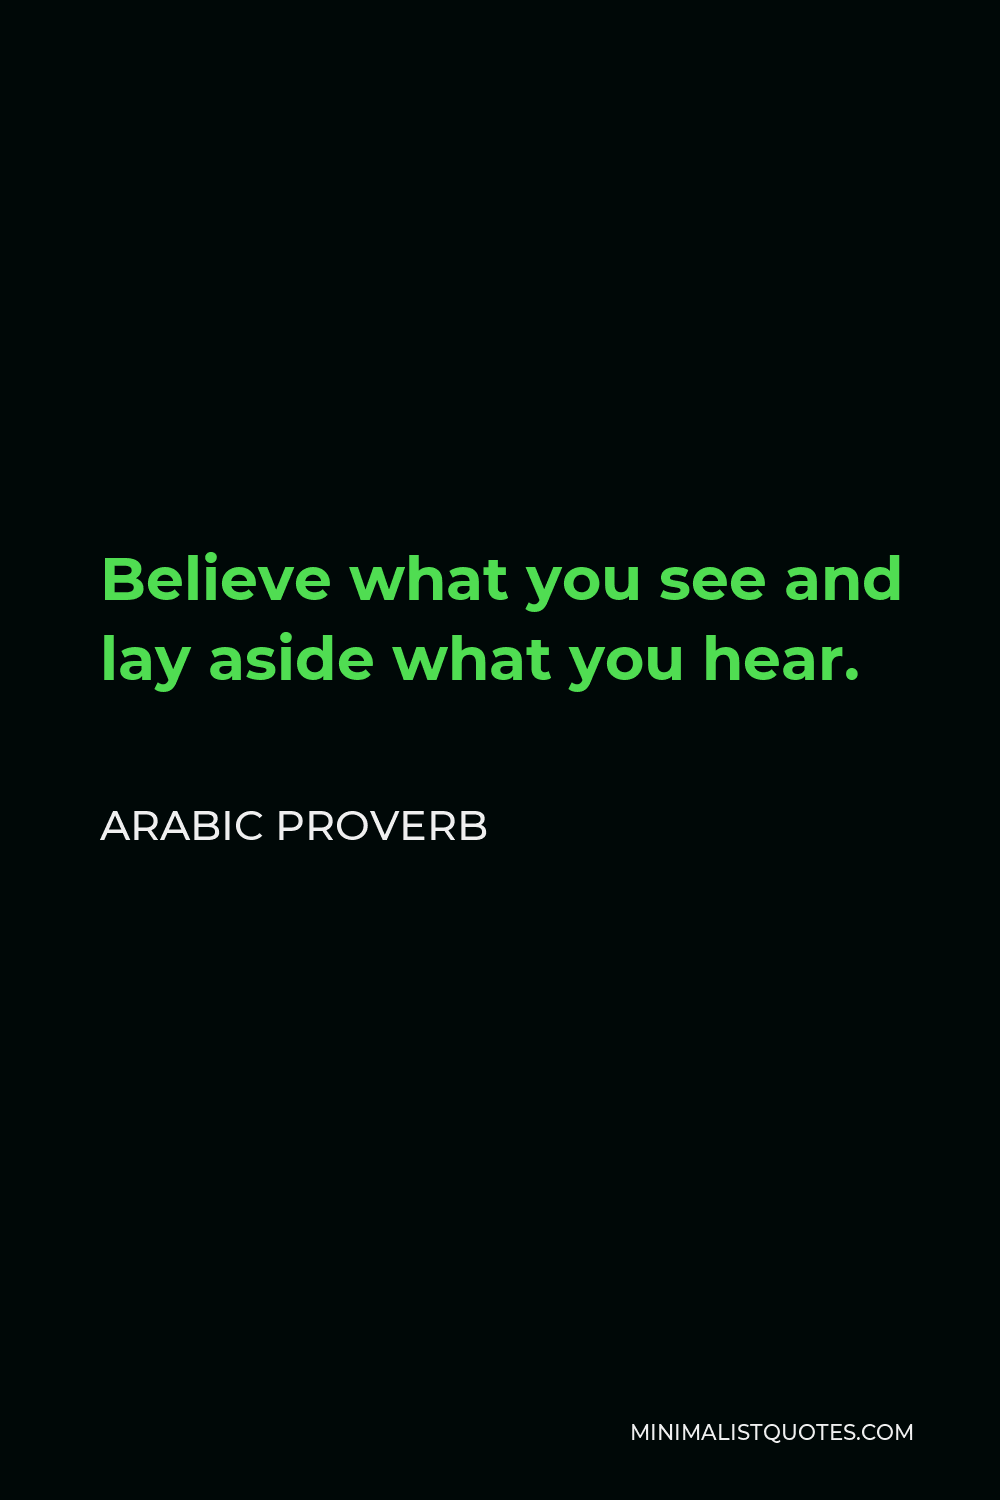 Arabic Proverb Quote - Believe what you see and lay aside what you hear.